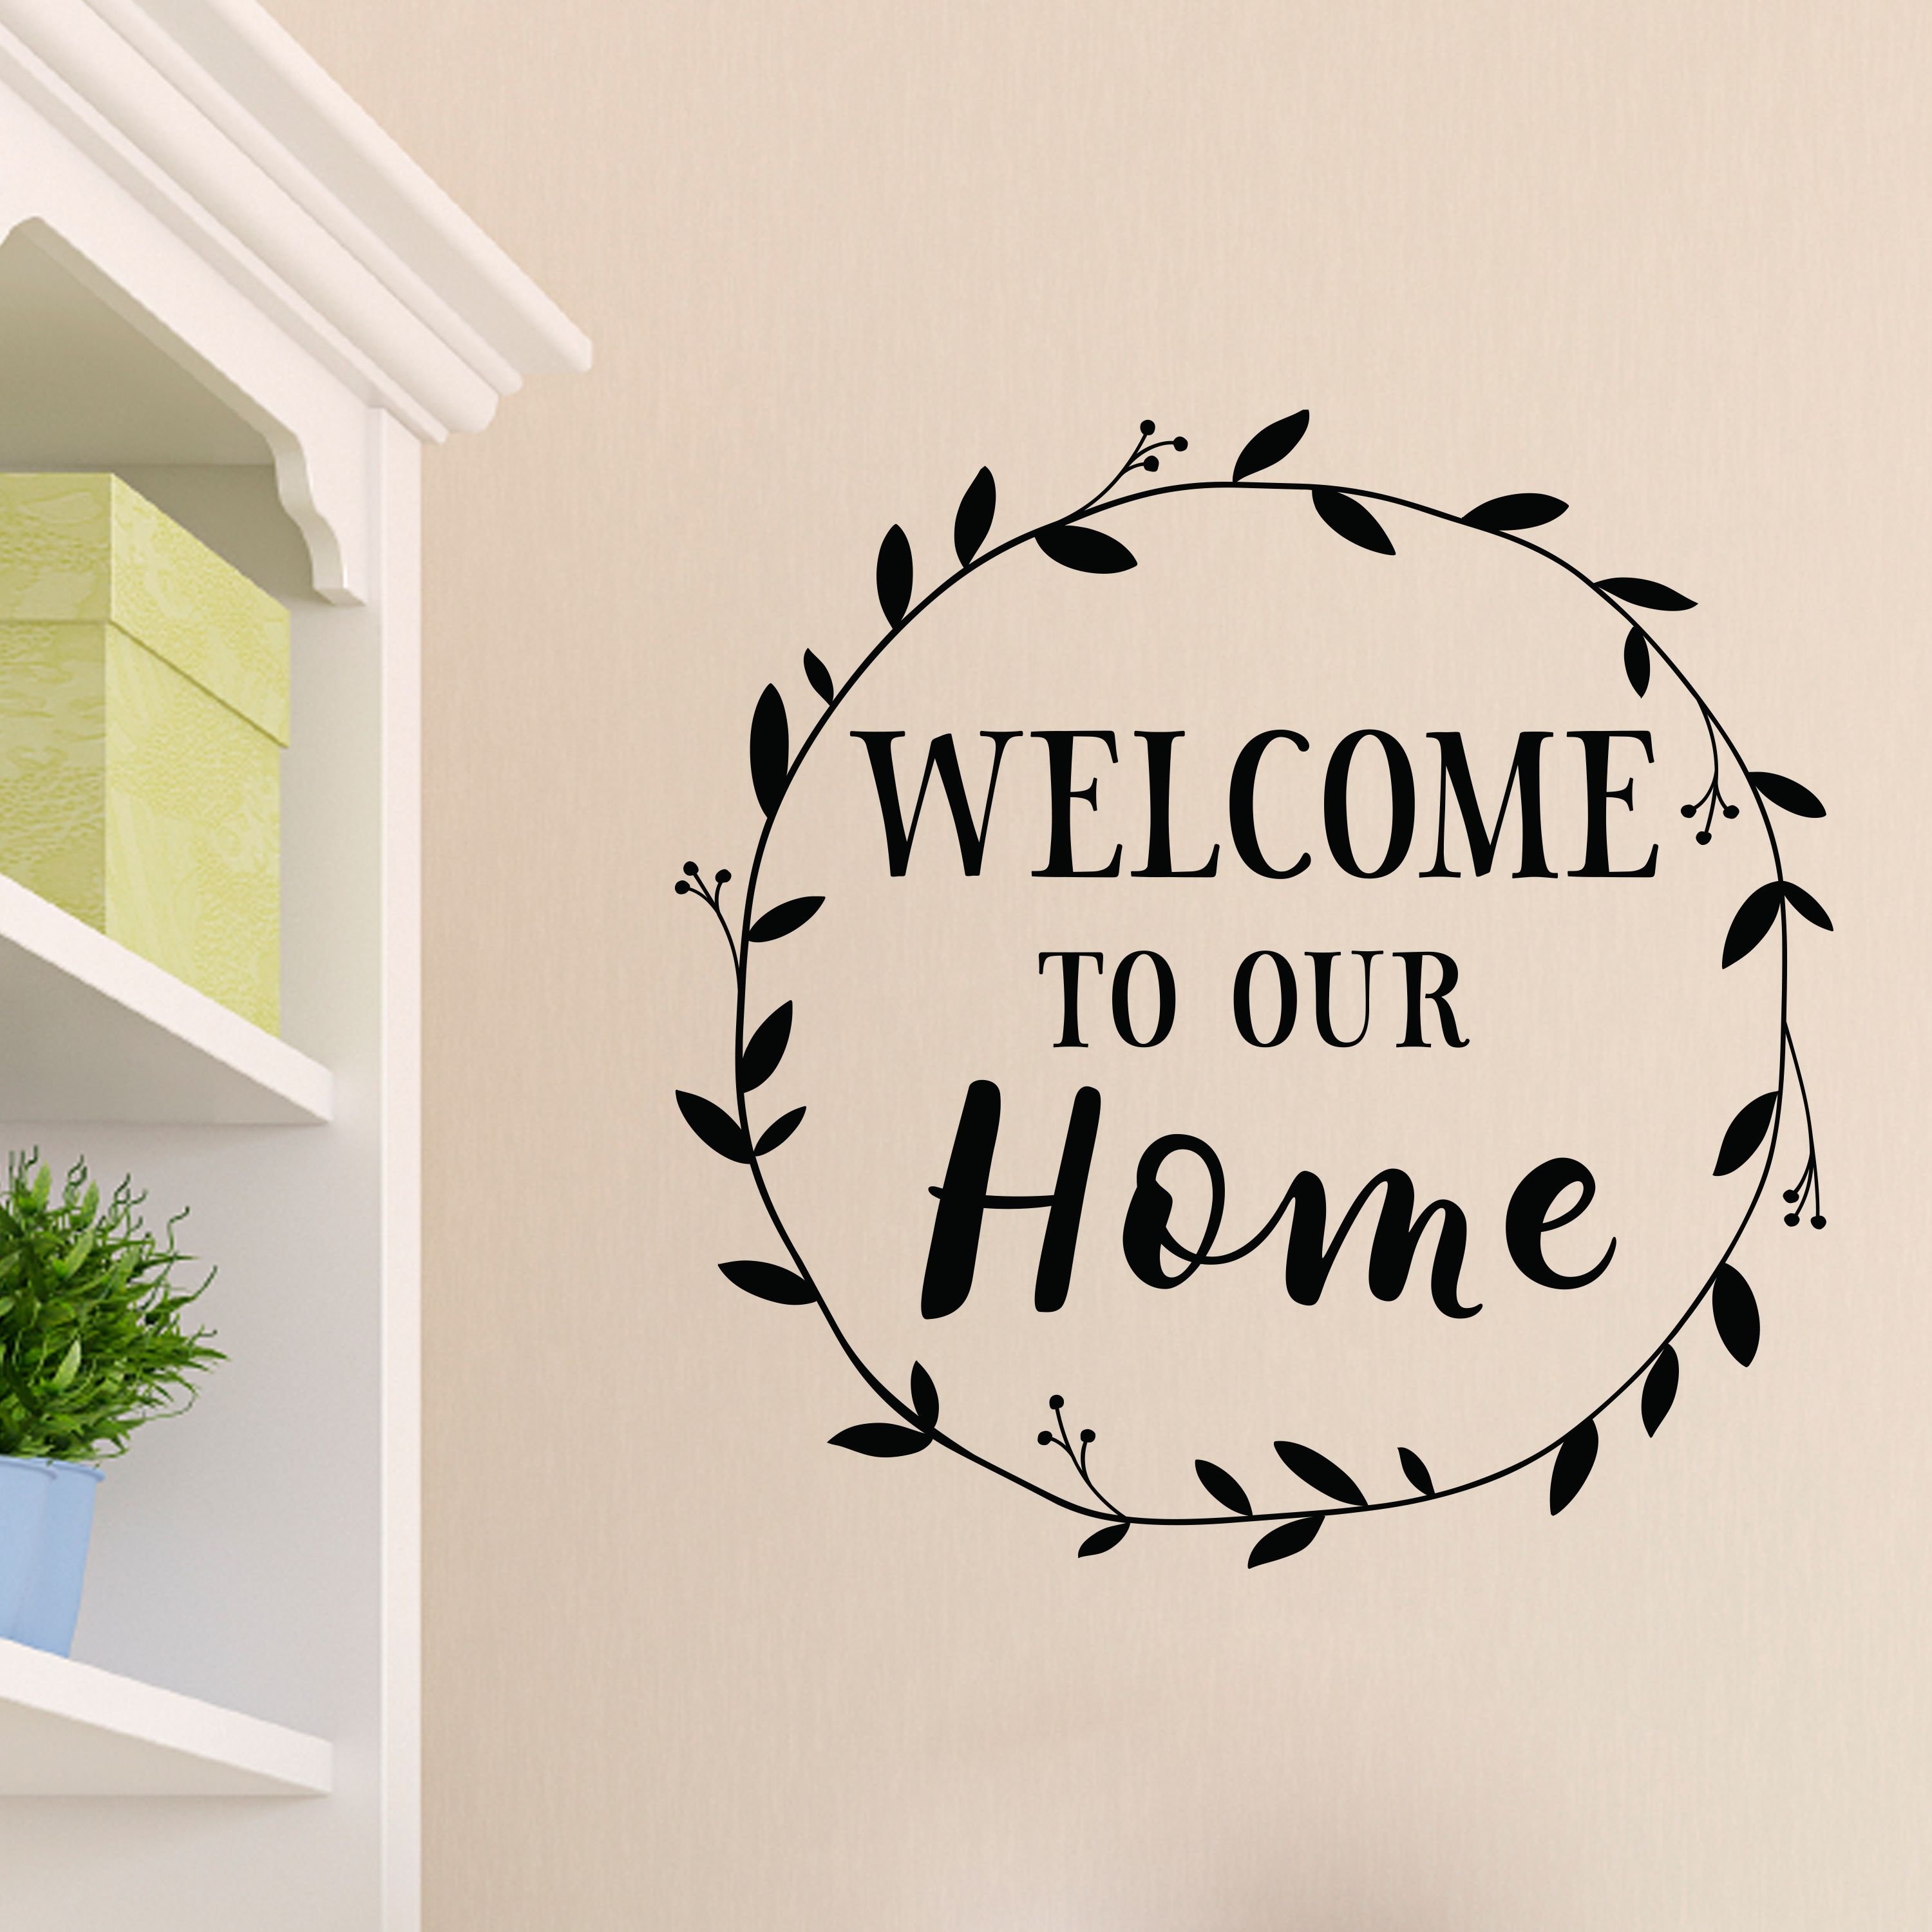 Welcome To Our Home Vinyl Wall Decal, Entry Wall Art, Picture Wall Pertaining To Home Wall Art (View 13 of 20)